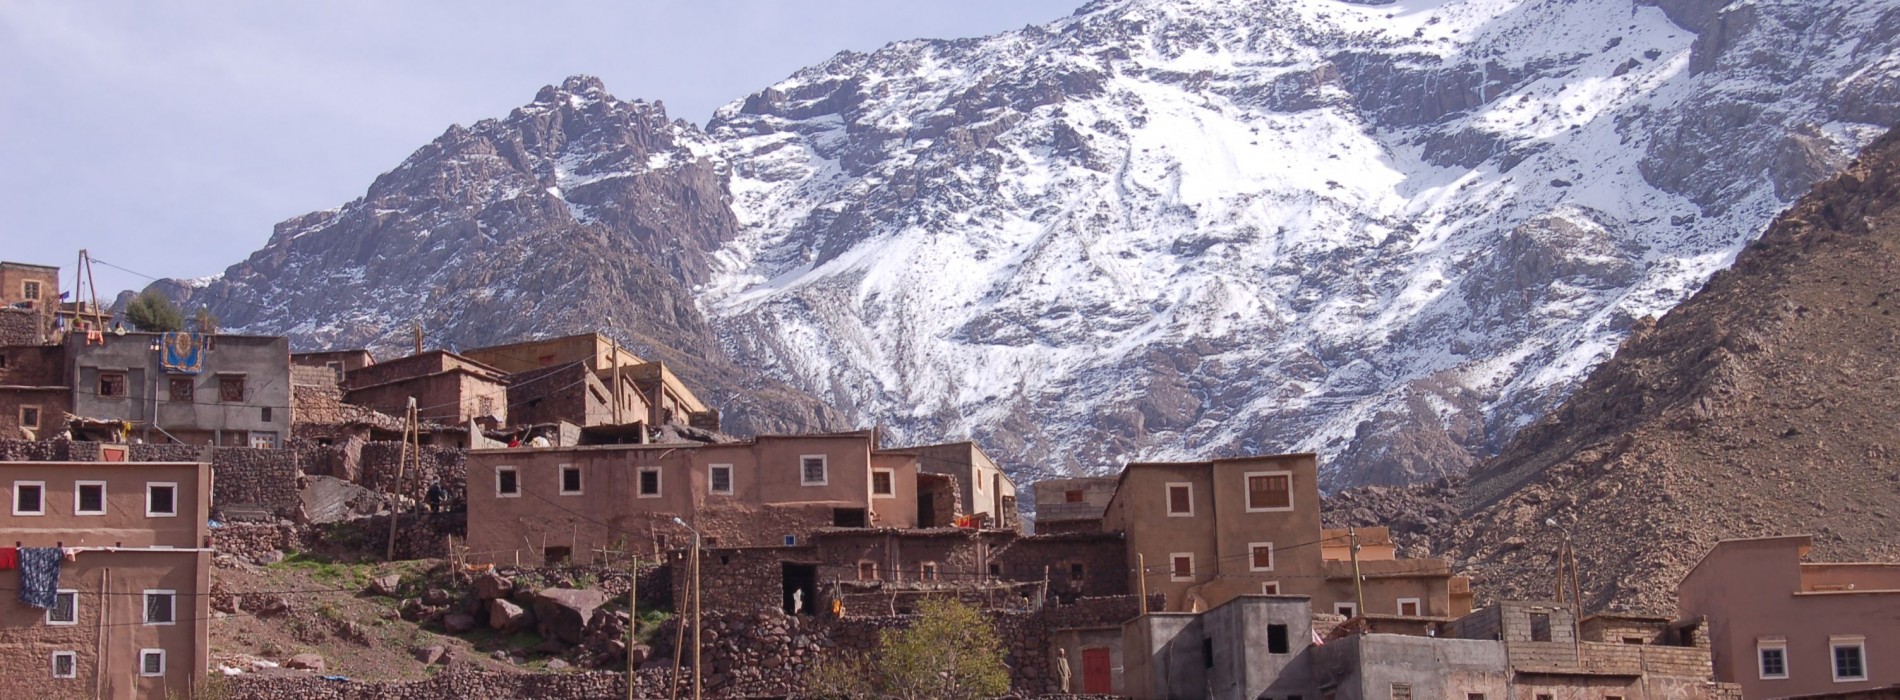 Village with snow topped mountains